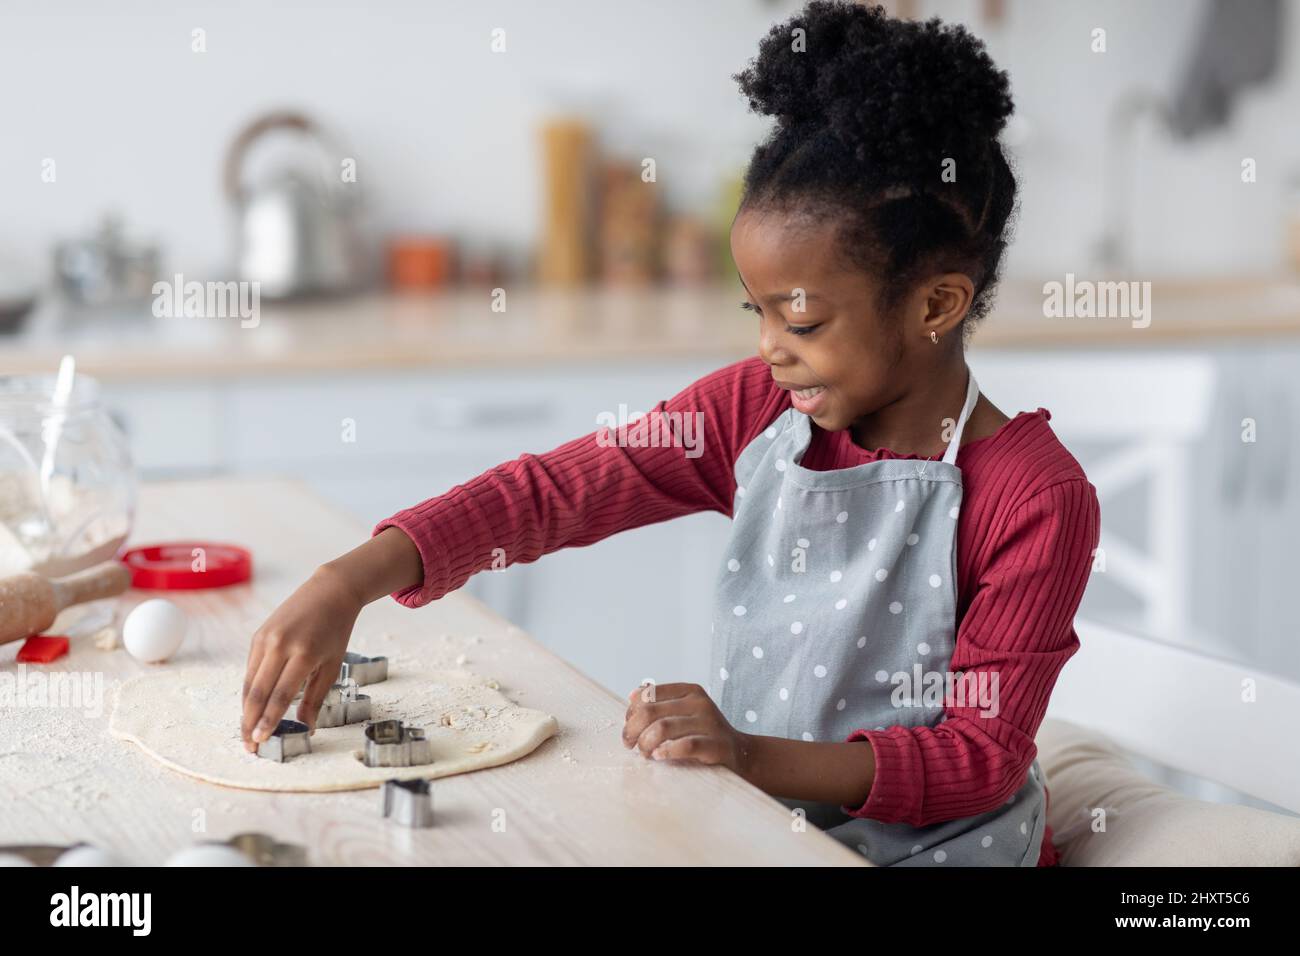 Little cook cute black girl making cookies Stock Photo